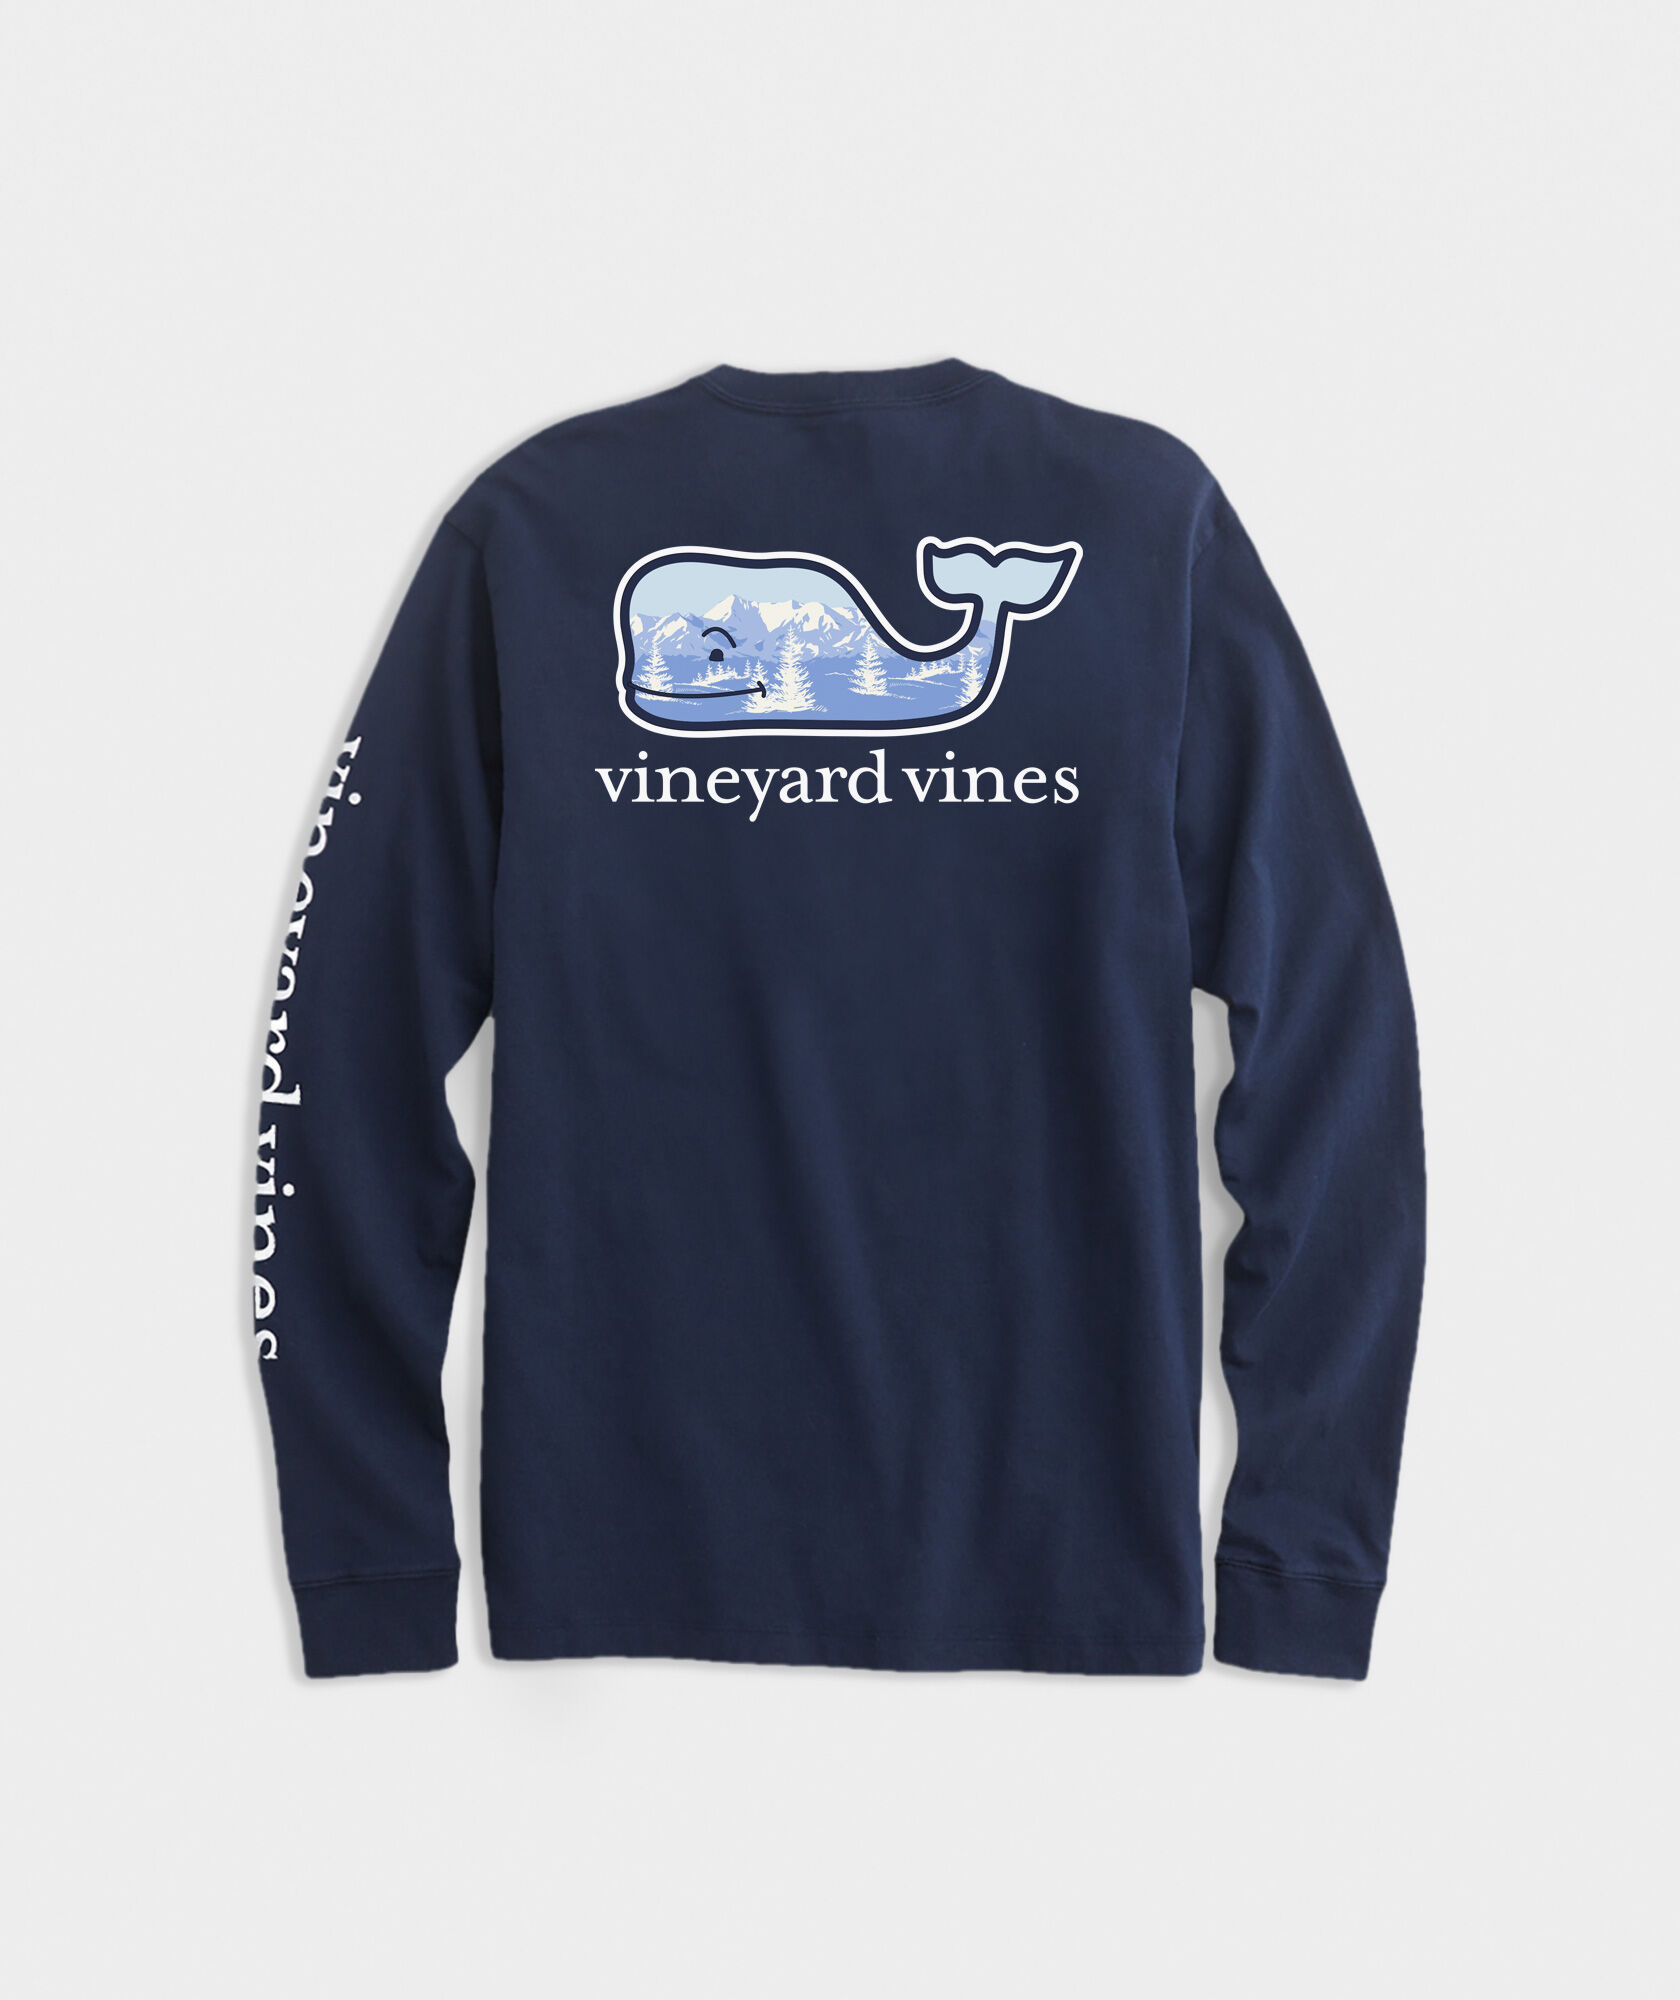 Shop Scenic Mountain Whale Fill Long Sleeve Pocket Tee at vineyard vines